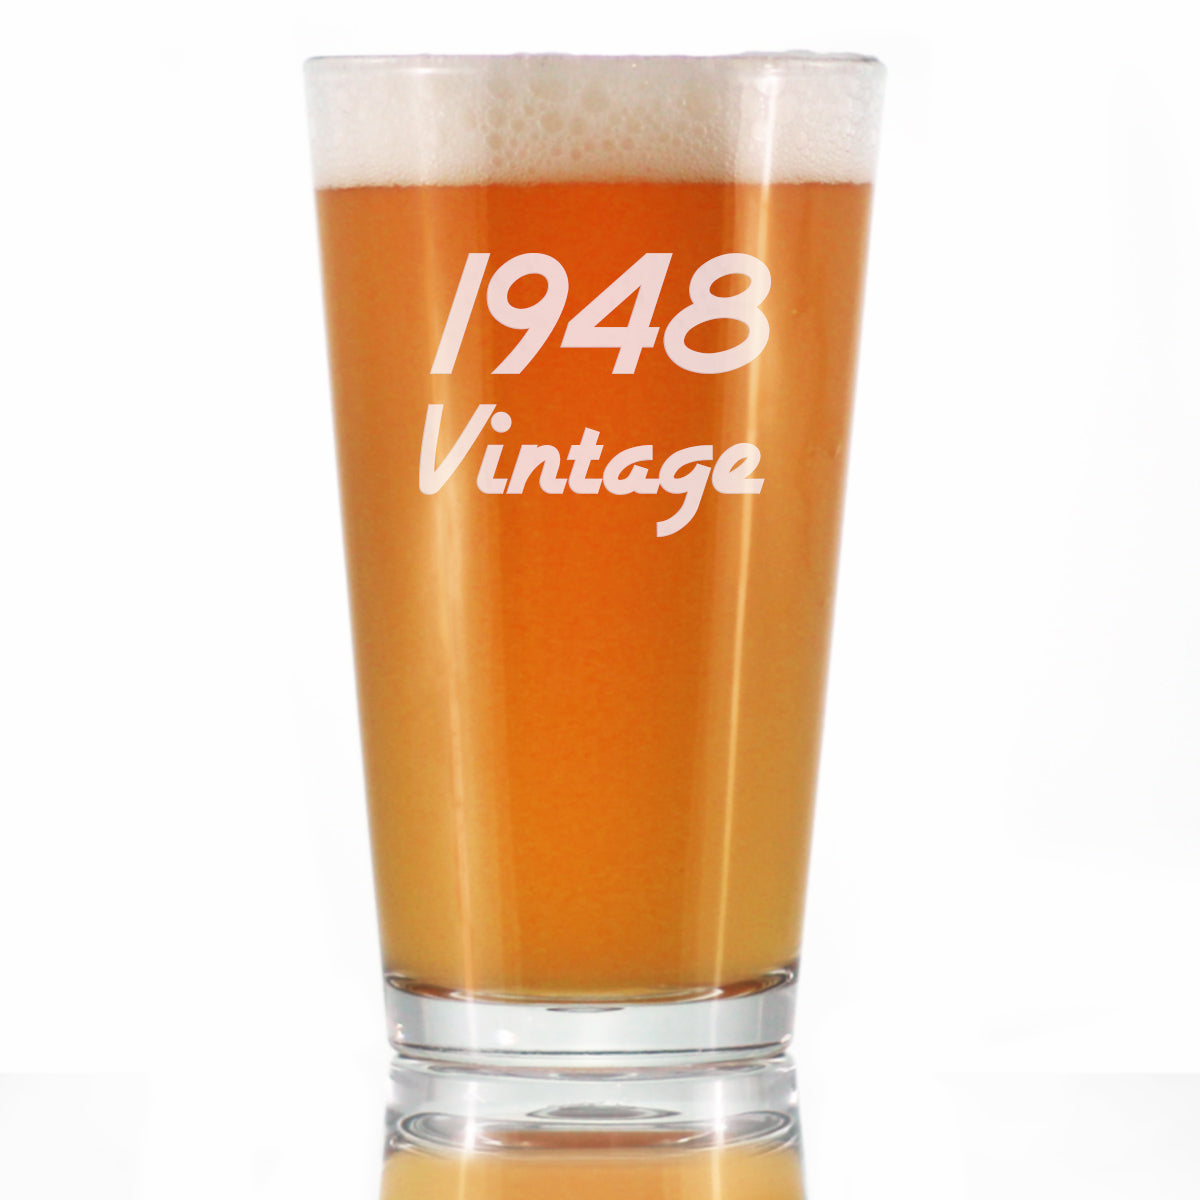 Vintage 1948 - Pint Glass for Beer - 75th Birthday Gifts for Men or Women Turning 75 - Fun Bday Party Decor - 16 oz